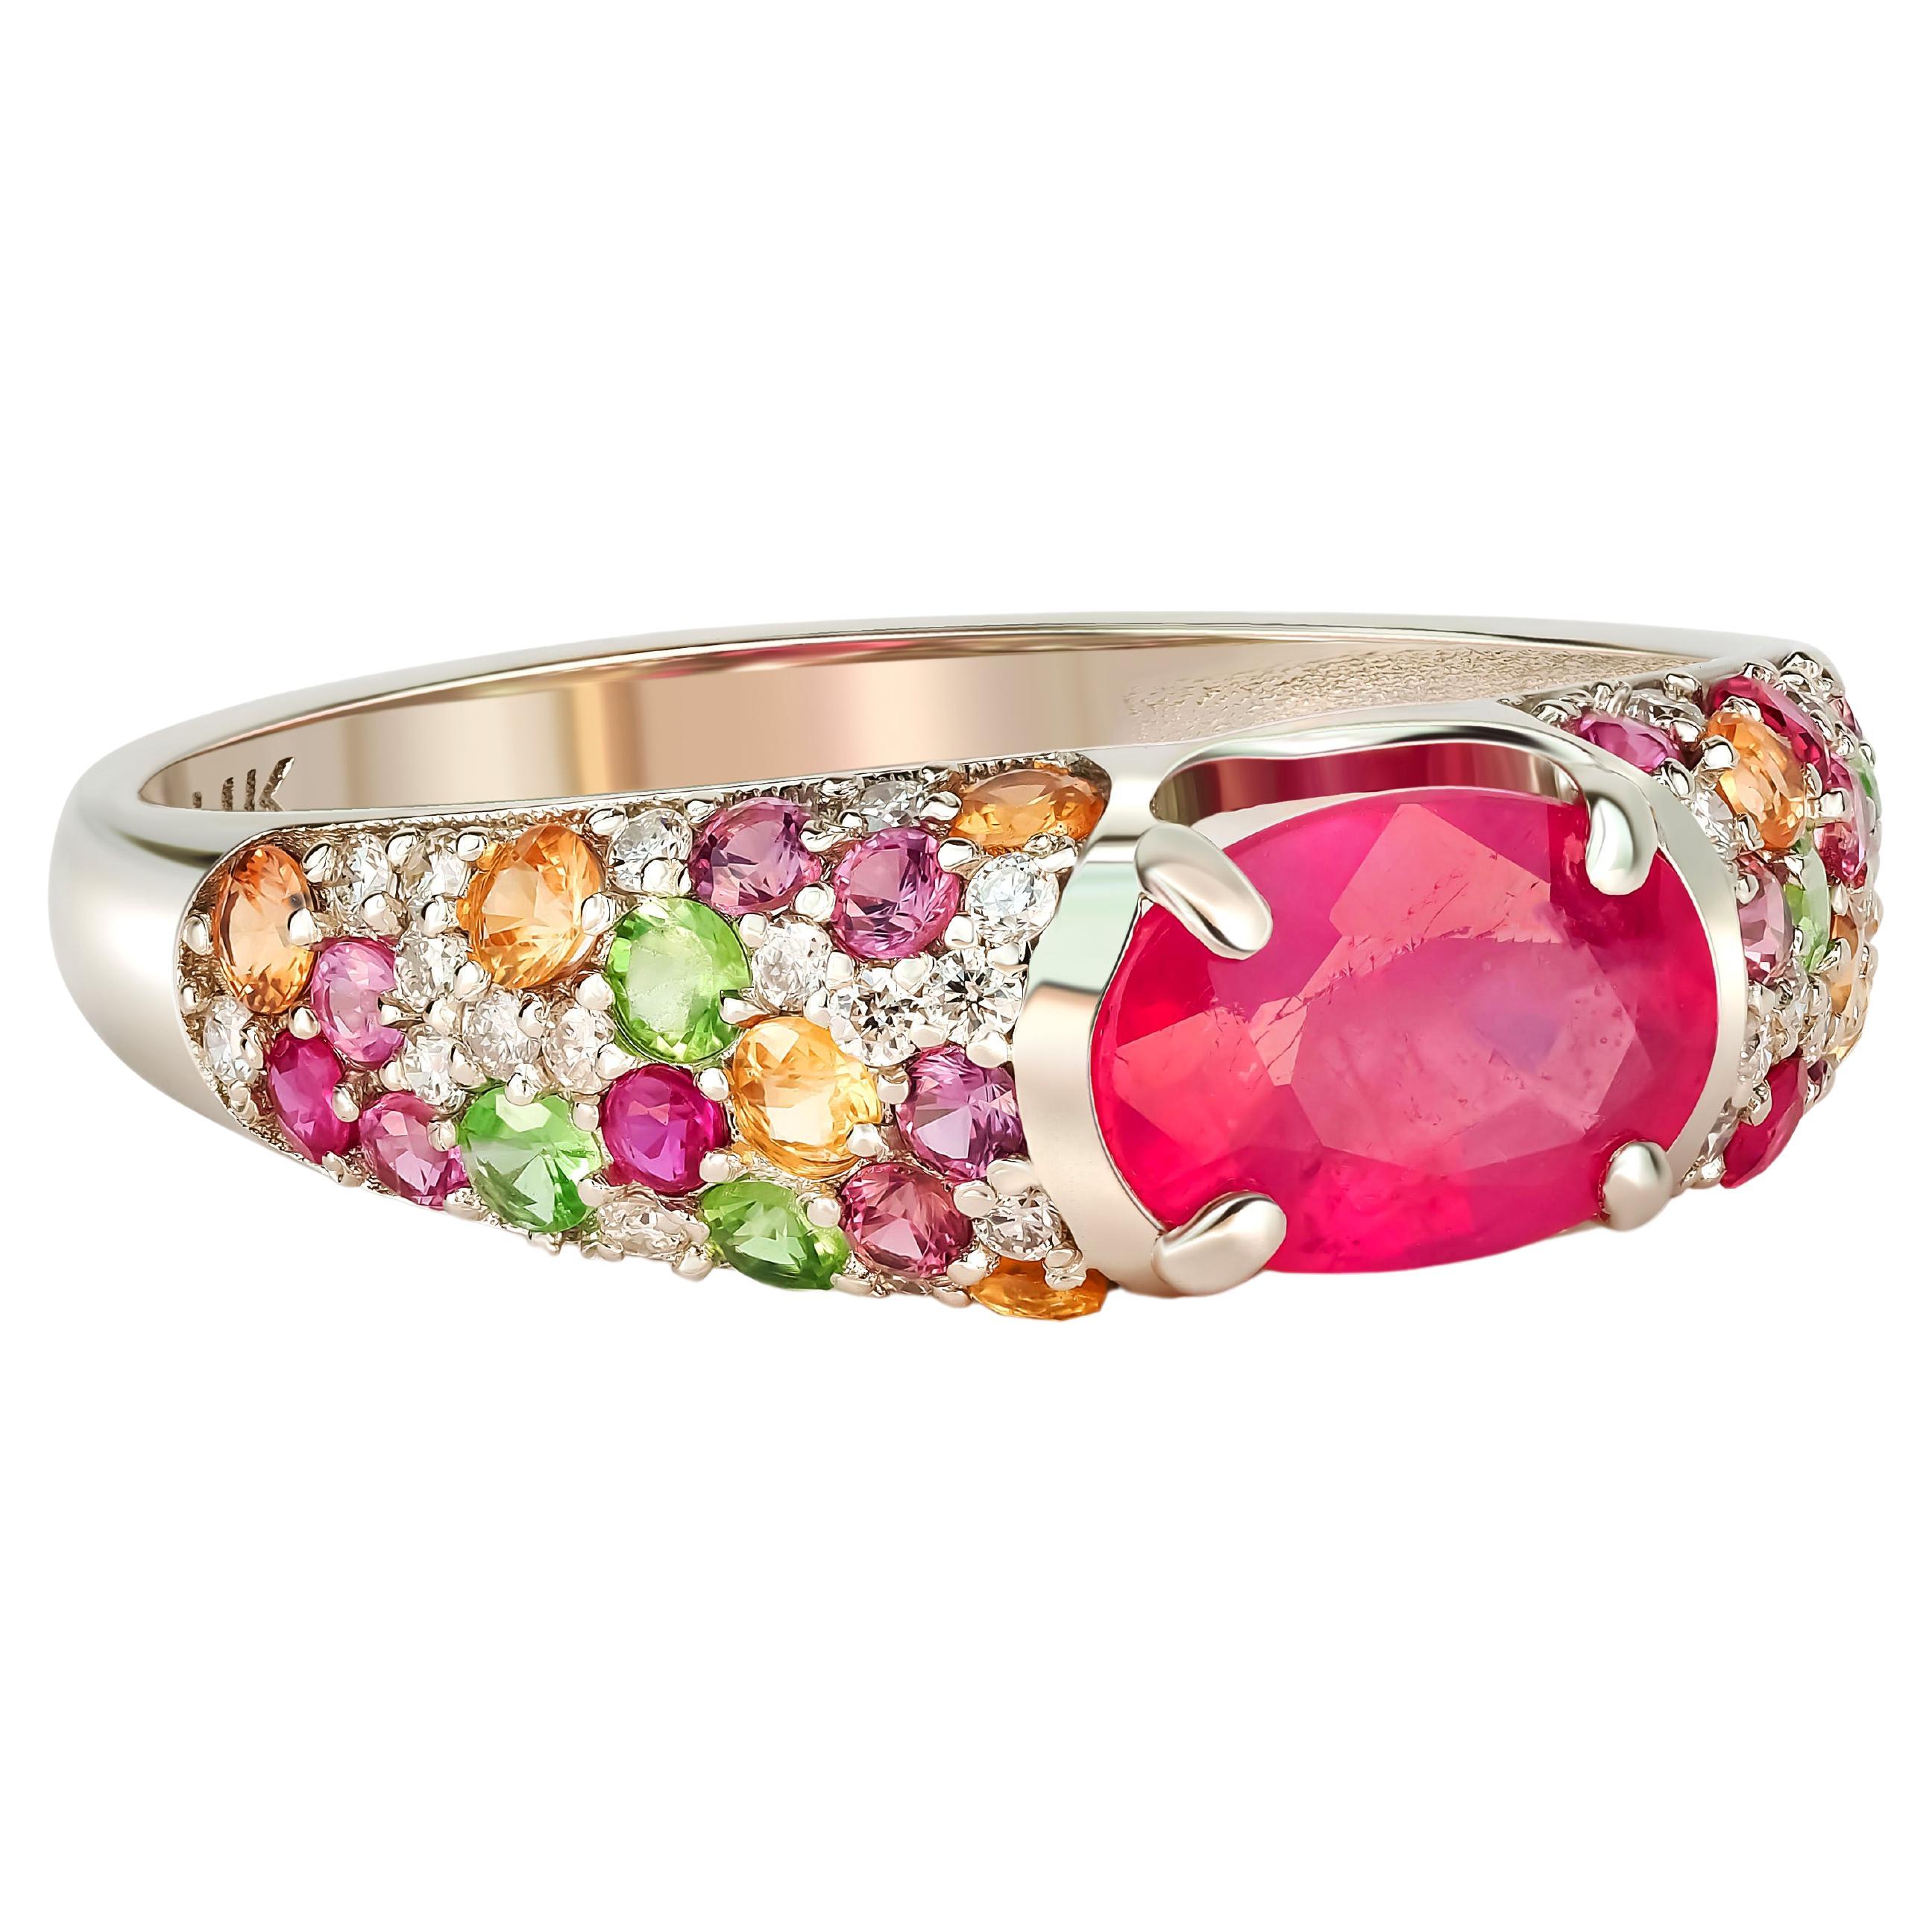 14k gold ruby and multicolored gemstones ring.